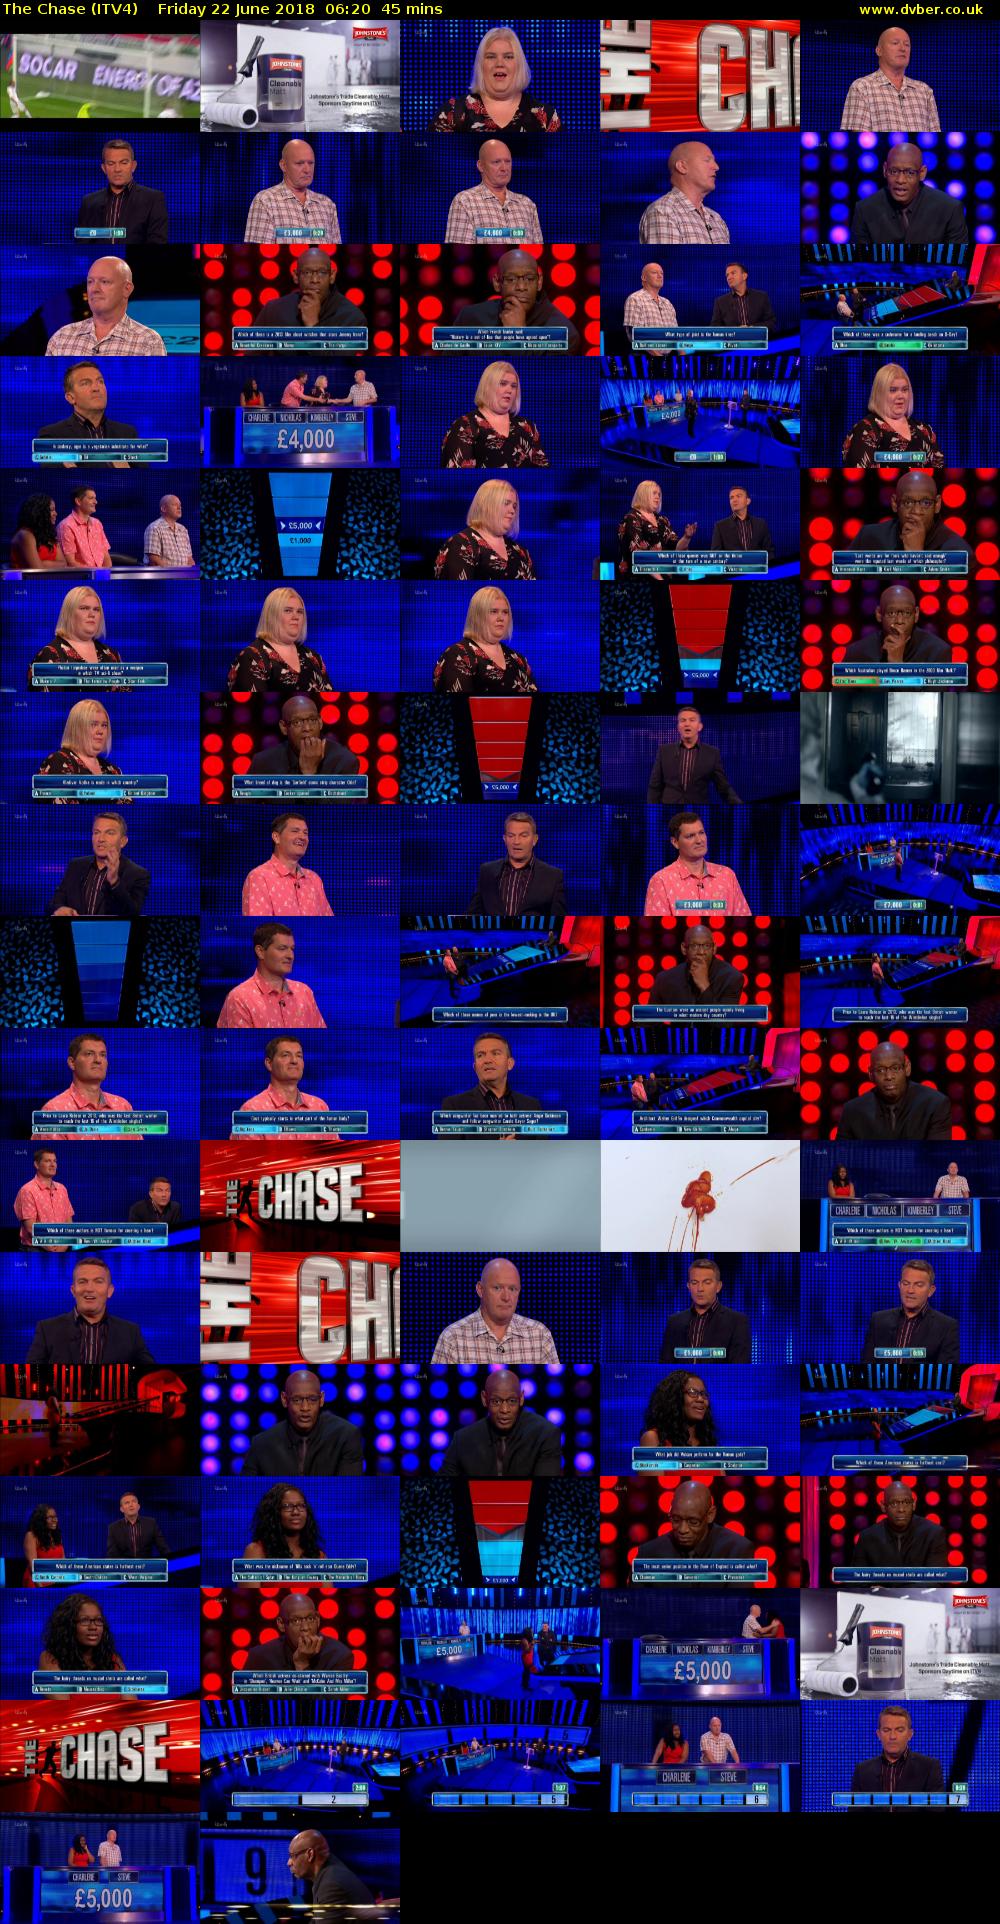 The Chase (ITV4) Friday 22 June 2018 06:20 - 07:05